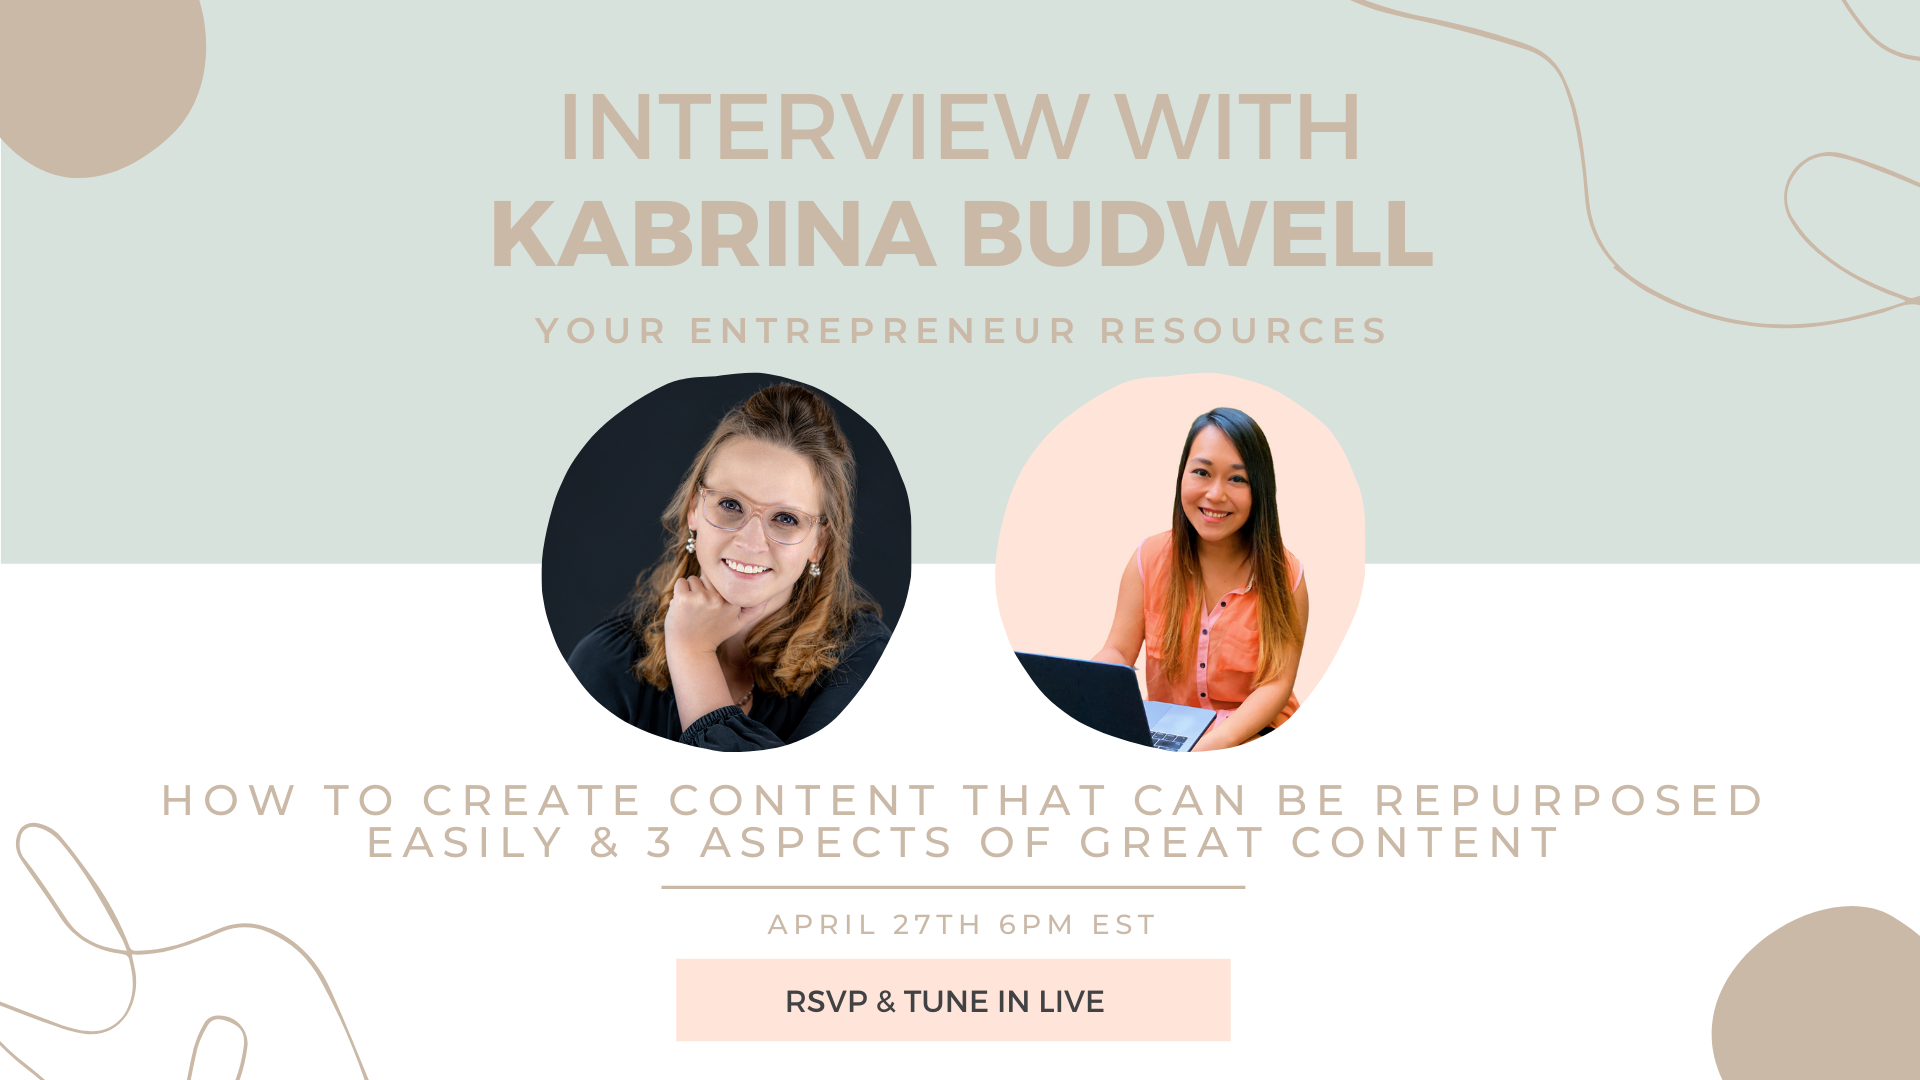 How to Create Content that can be repurposed easily & 3 aspects of great content with Kabrina Budwel